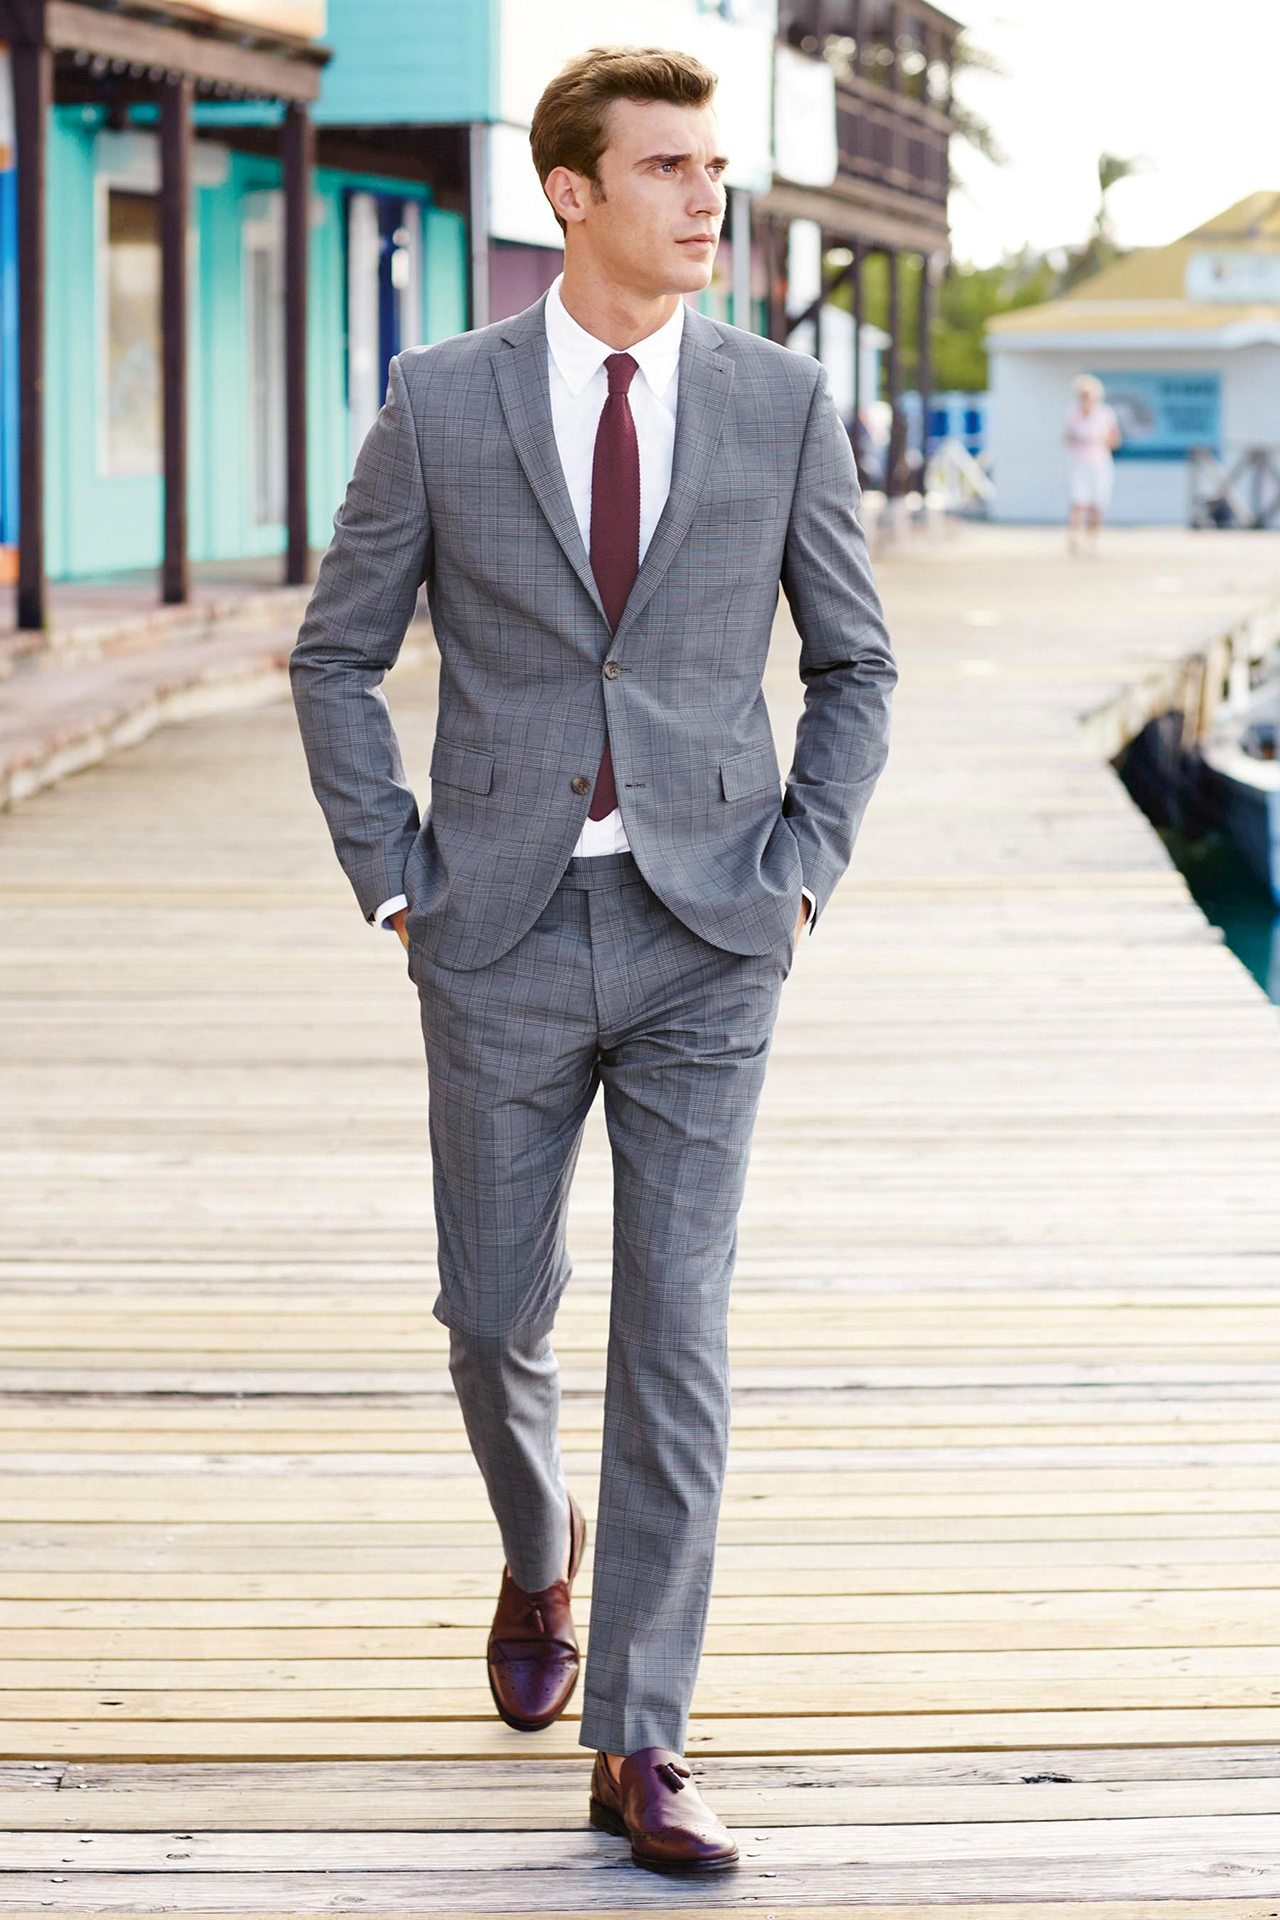 patterned light grey suit, white shirt, maroon tie, and burgundy loafers